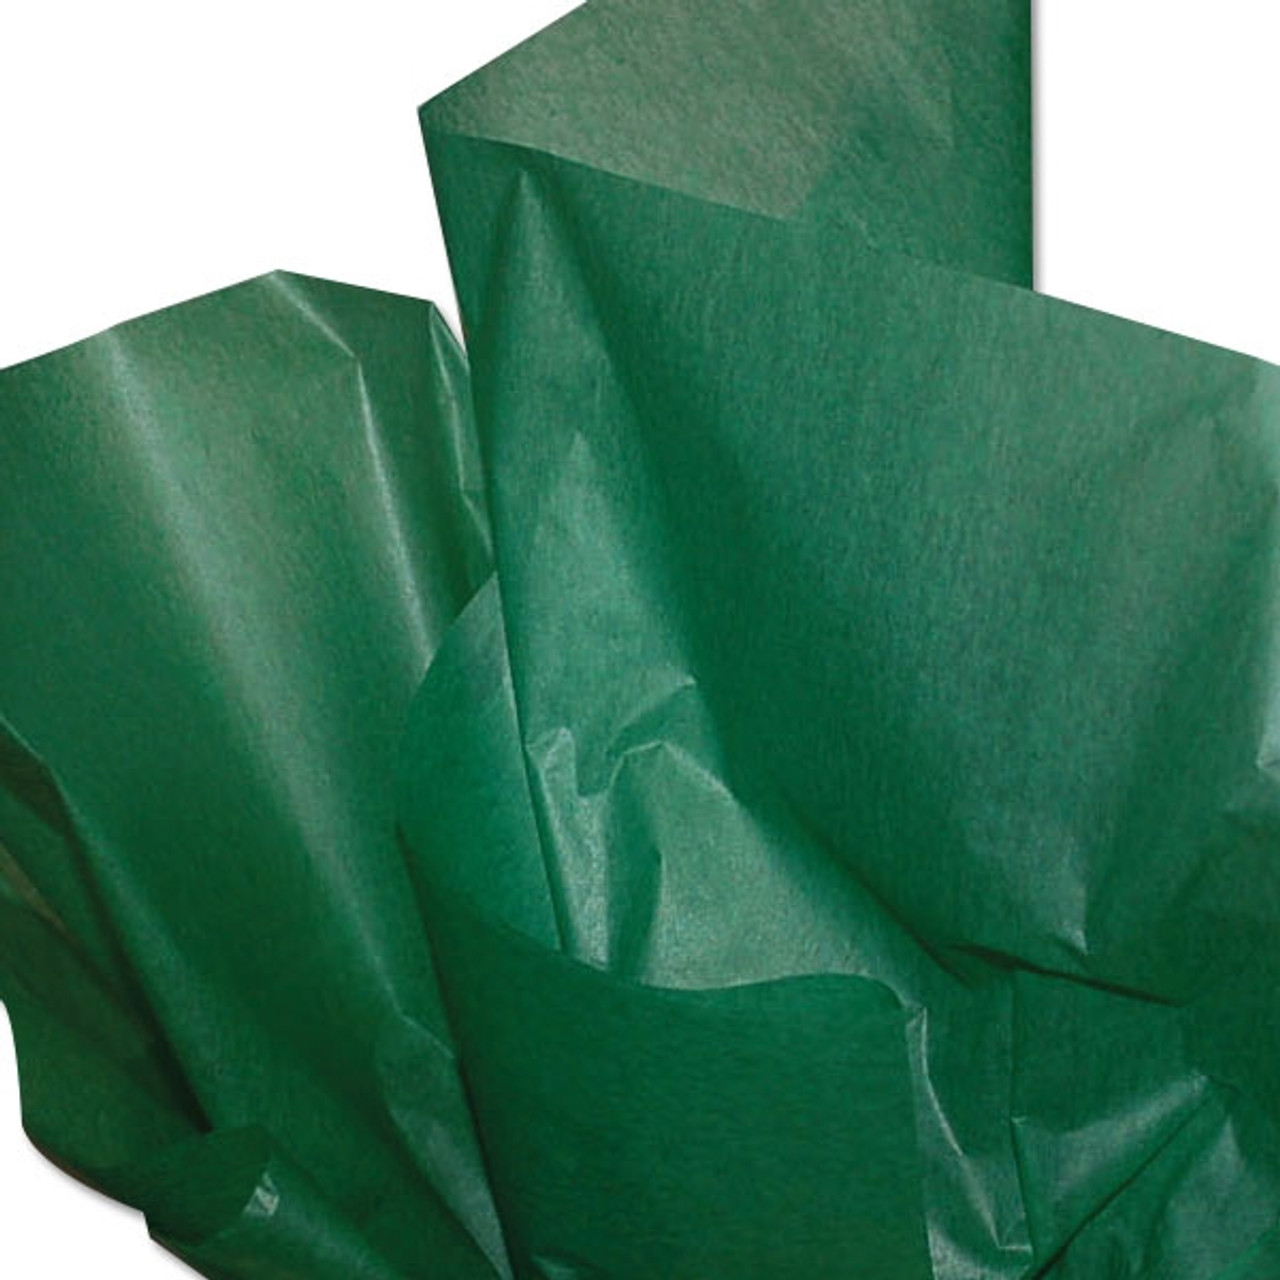 Dry Waxed Green Tissue Paper - 18 x 24 - 480 Sheets per Ream